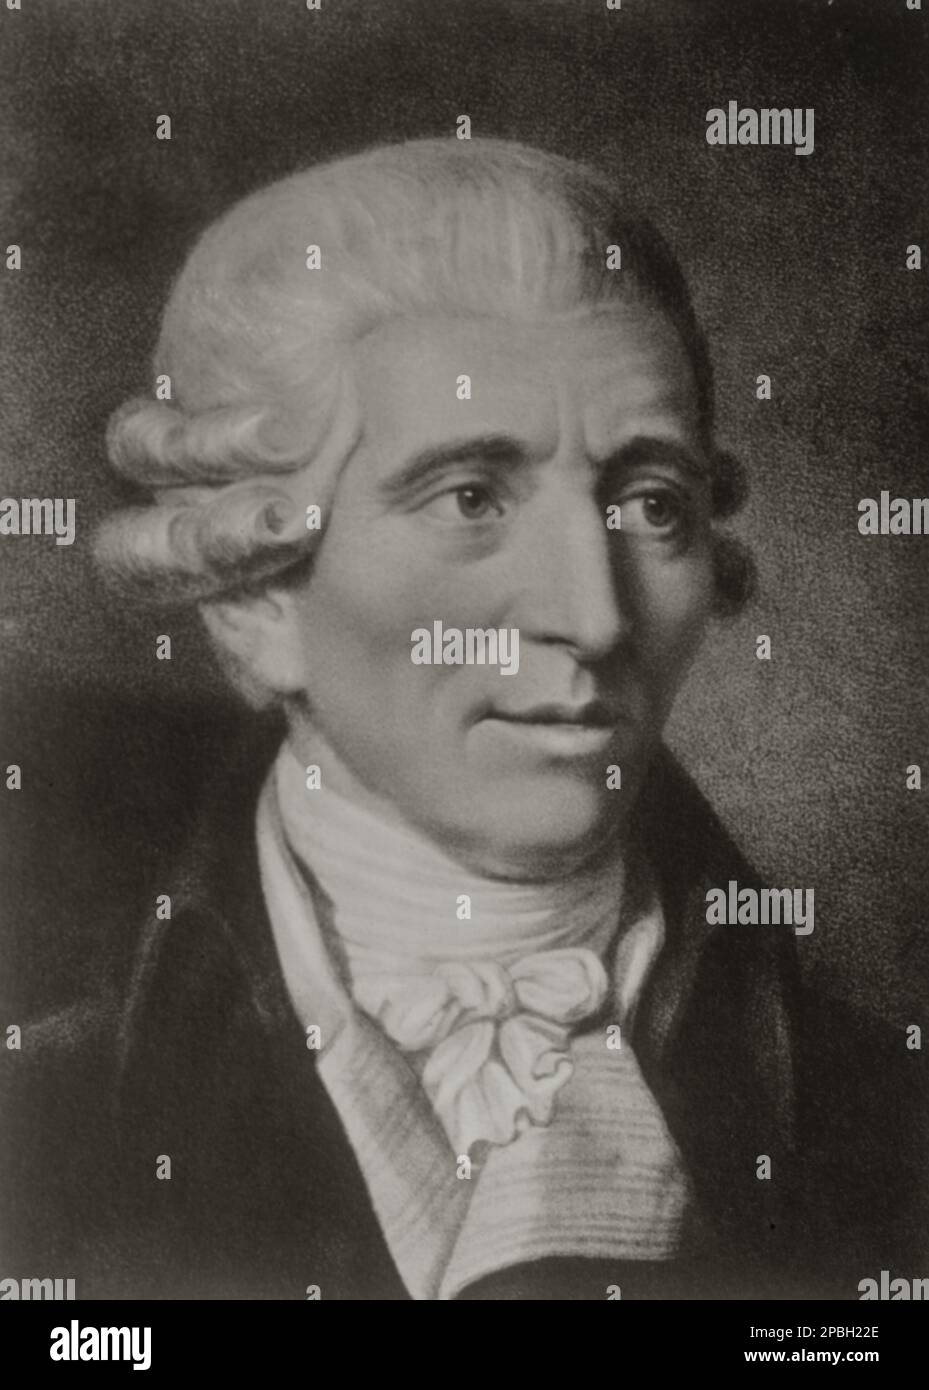 The celebrated austrian Baroque music composer  Franz JOSEPH HAYDN ( 1732 - 1809 ).He was one of the most prominent composers of the classical period, and is called by some the 'Father of the Symphony' and 'Father of the String Quartet'. A life-long citizen of Austria, Haydn spent much of his career as a court musician for the wealthy Hungarian Esterhezy family on their remote estate. Isolated from other composers and trends in music until the later part of his long life, he was, as he put it, 'forced to become original'. Joseph Haydn was the brother of Michael Haydn, himself a highly regarded Stock Photo